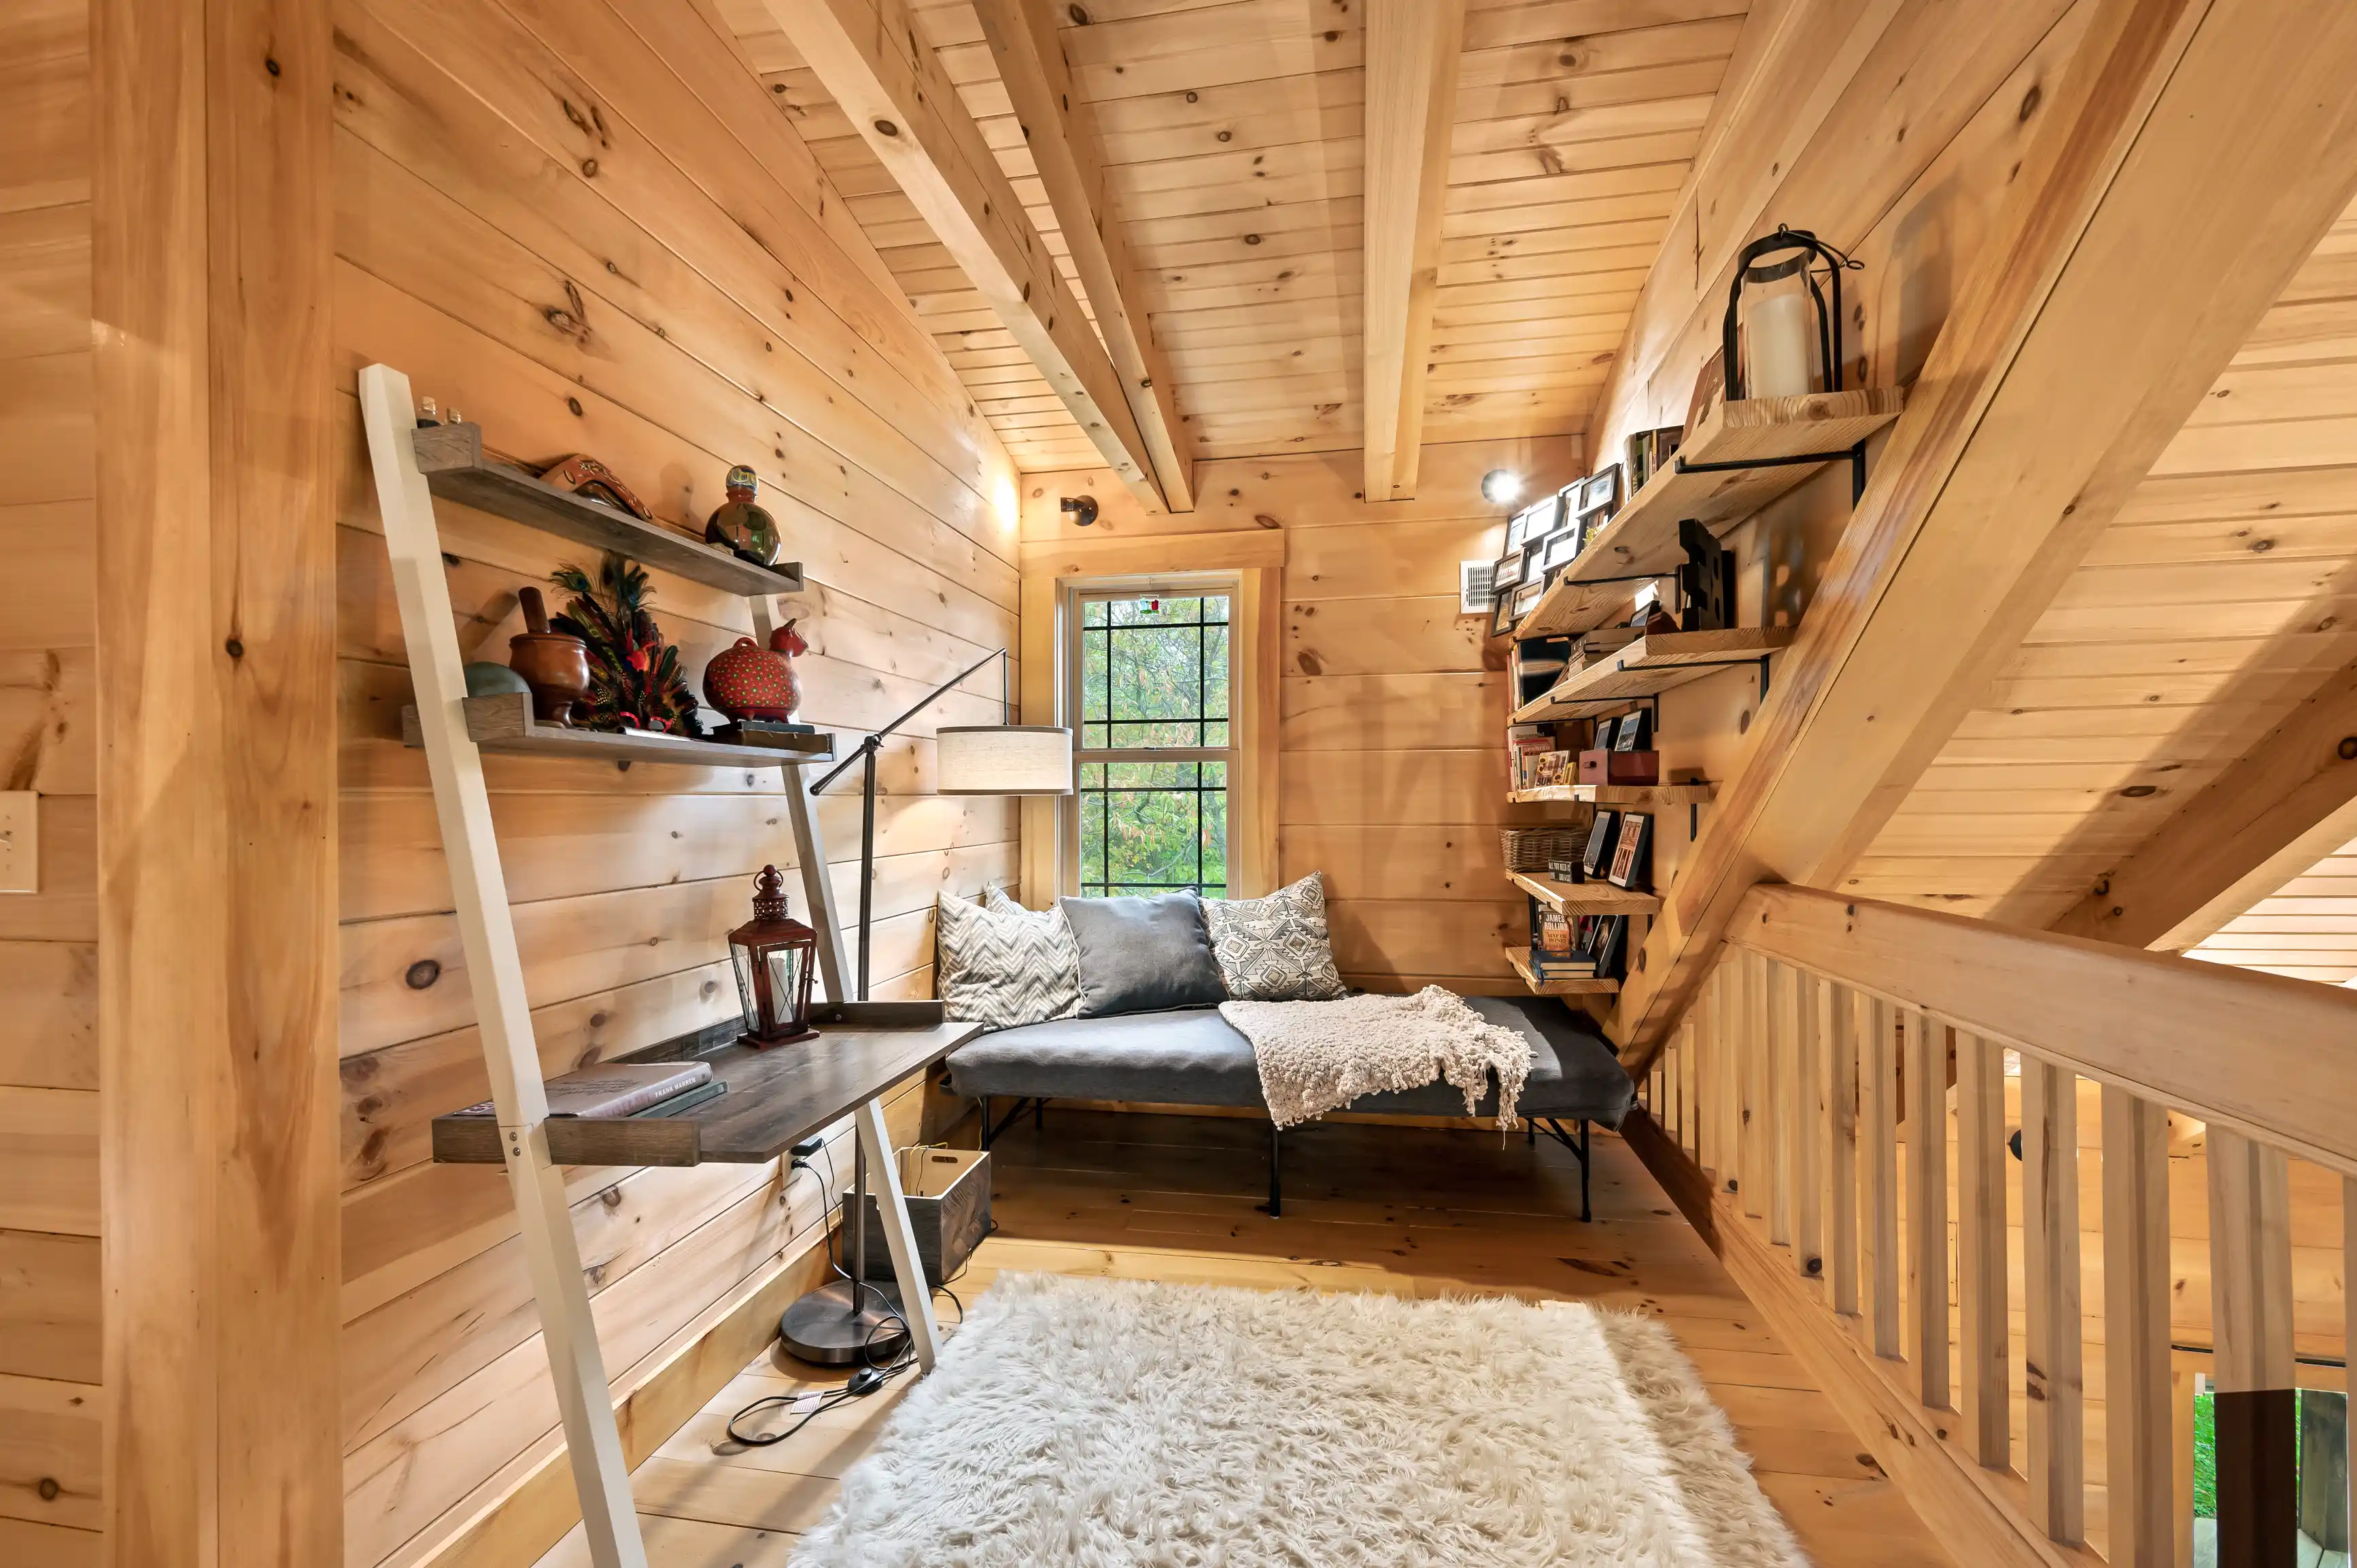 Cozy wooden interior of a cabin with a daybed, shelves, bookcase under stairs, and large window with nature view.